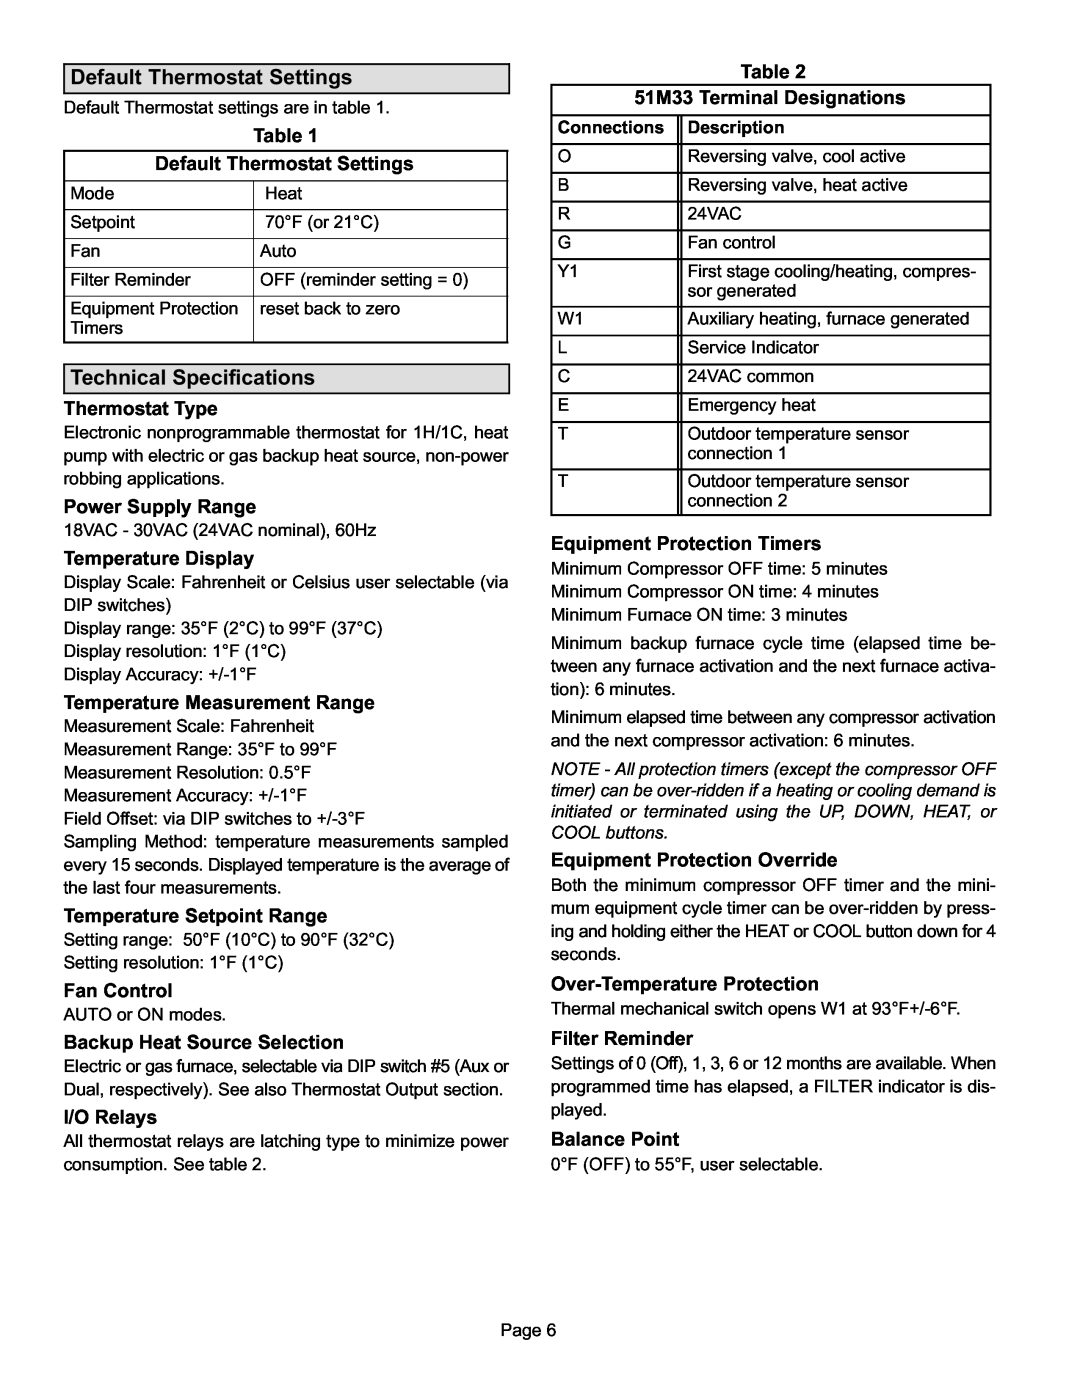 Lennox International Inc 51M32 operation manual Technical Specifications, Table Default Thermostat Settings 